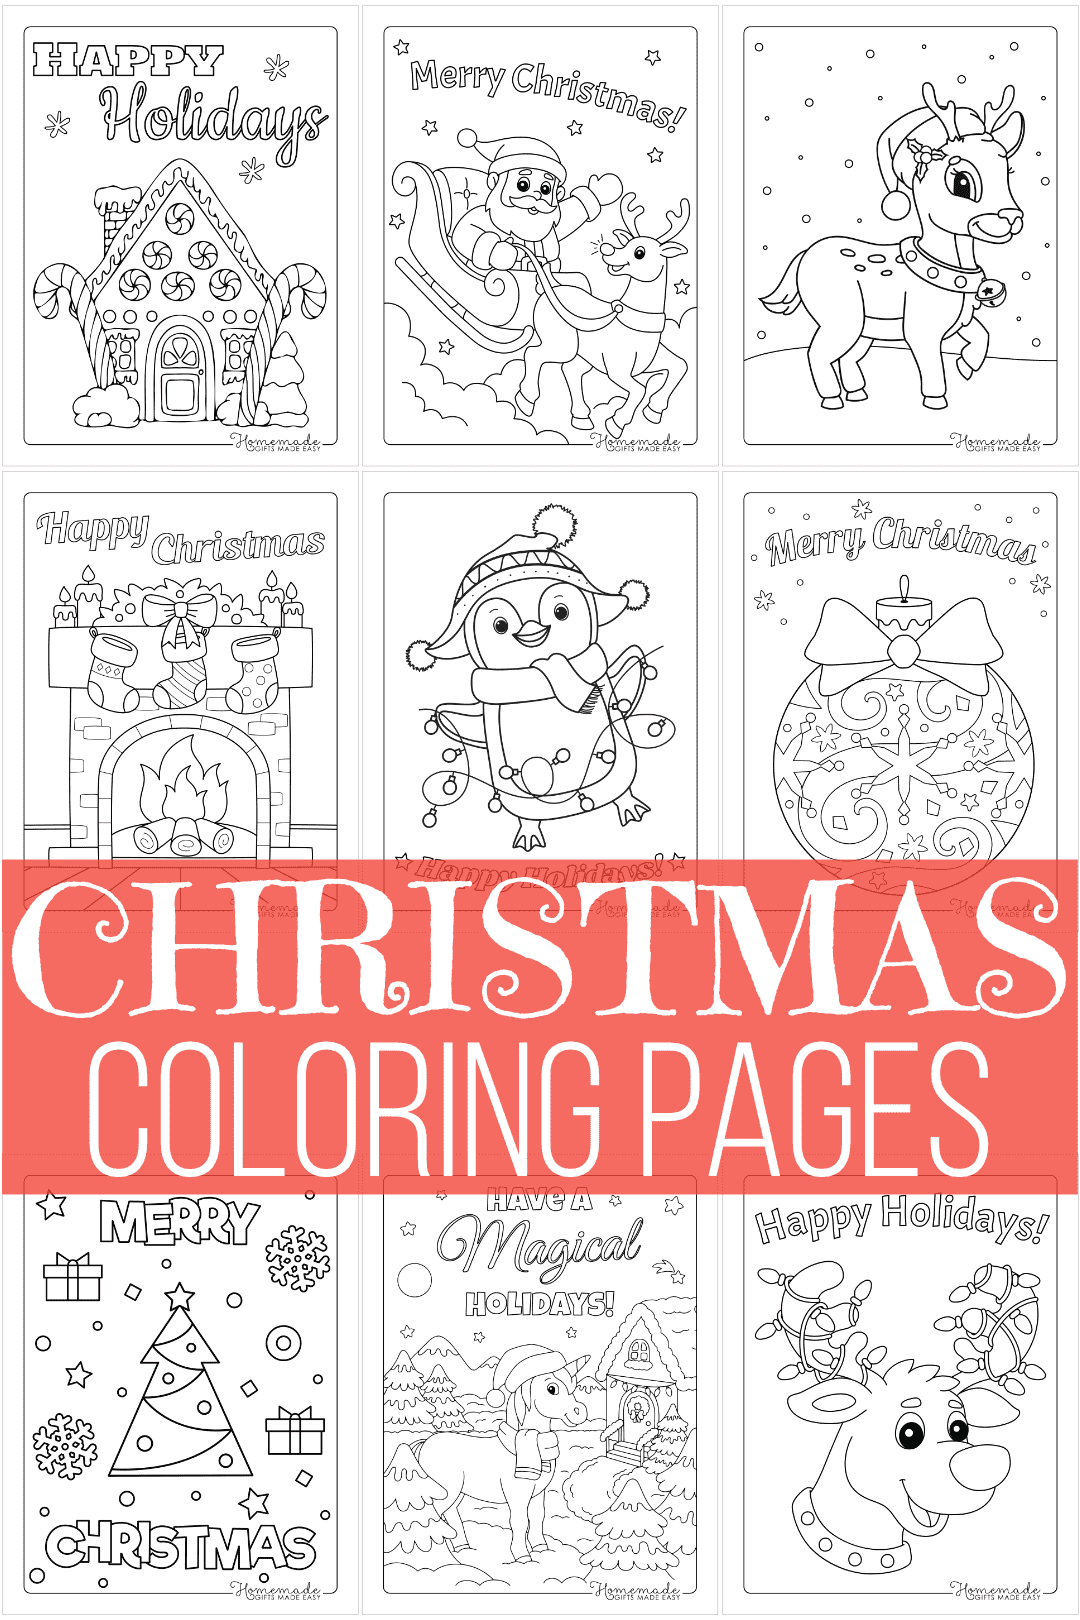 Download 100 Best Christmas Coloring Pages | Free Printable PDFs